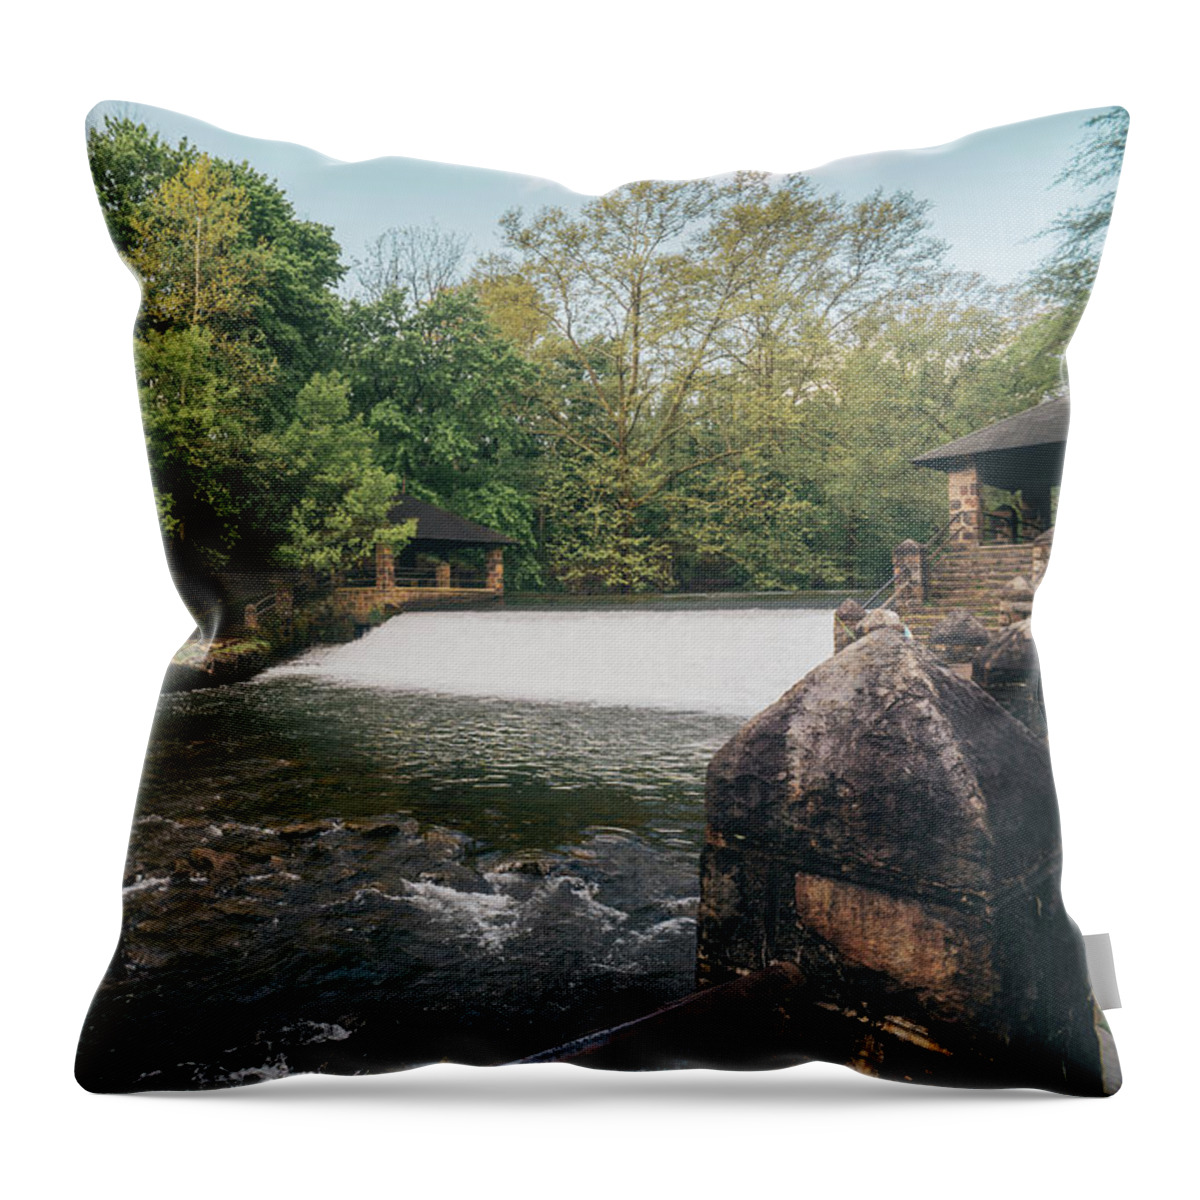 Afternoon Throw Pillow featuring the photograph The Waterfall At Monocacy Park by Jason Fink